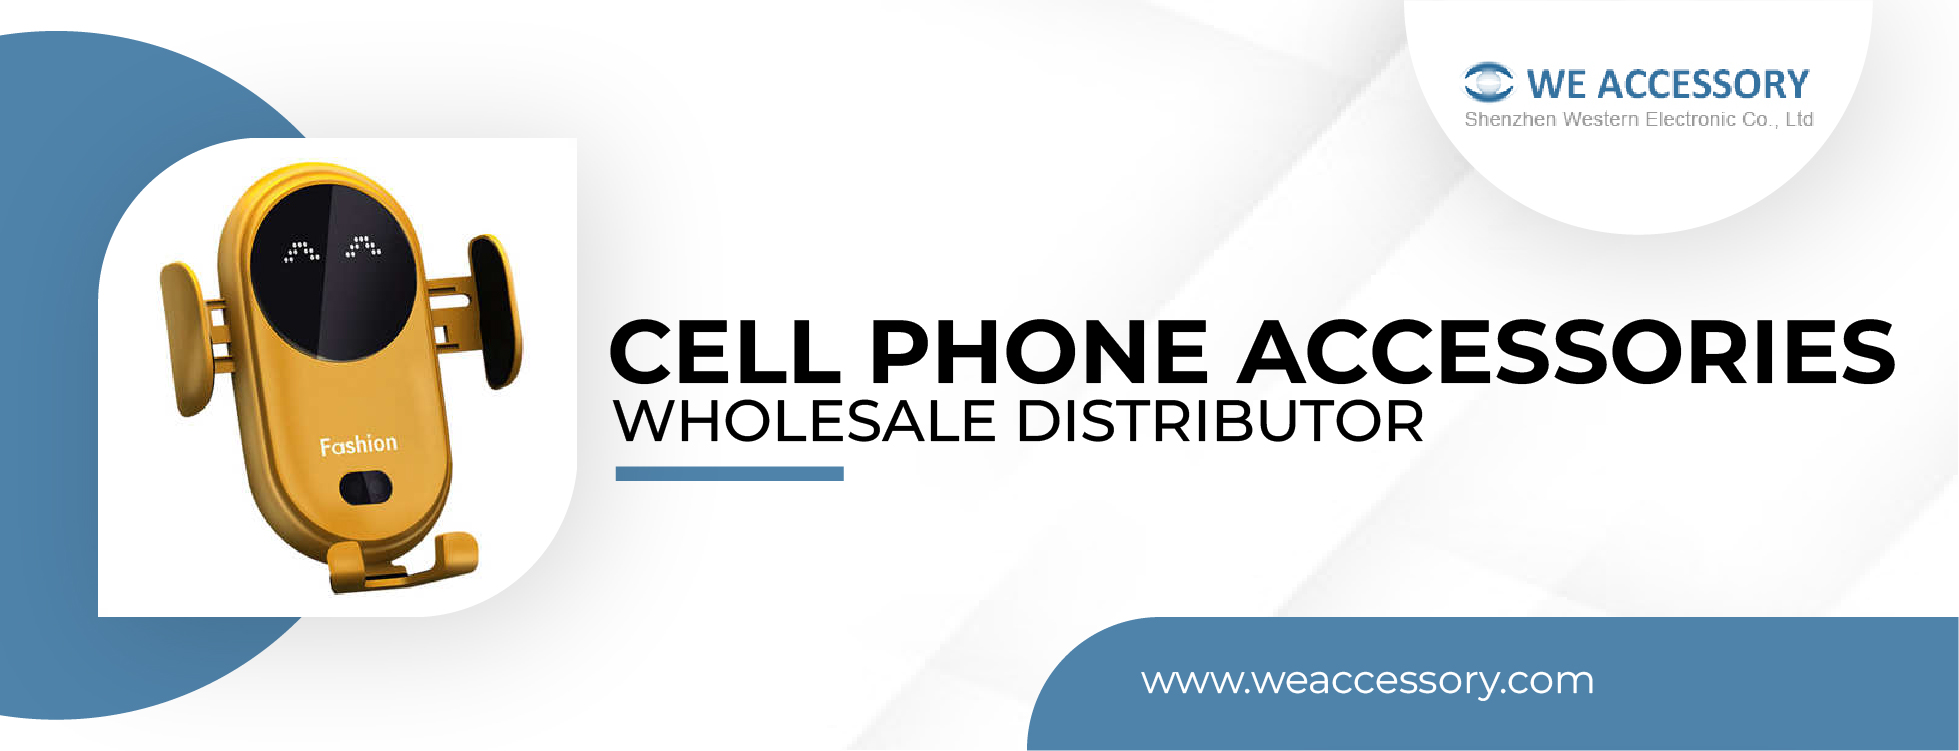 cell phone accessories wholesale distributor